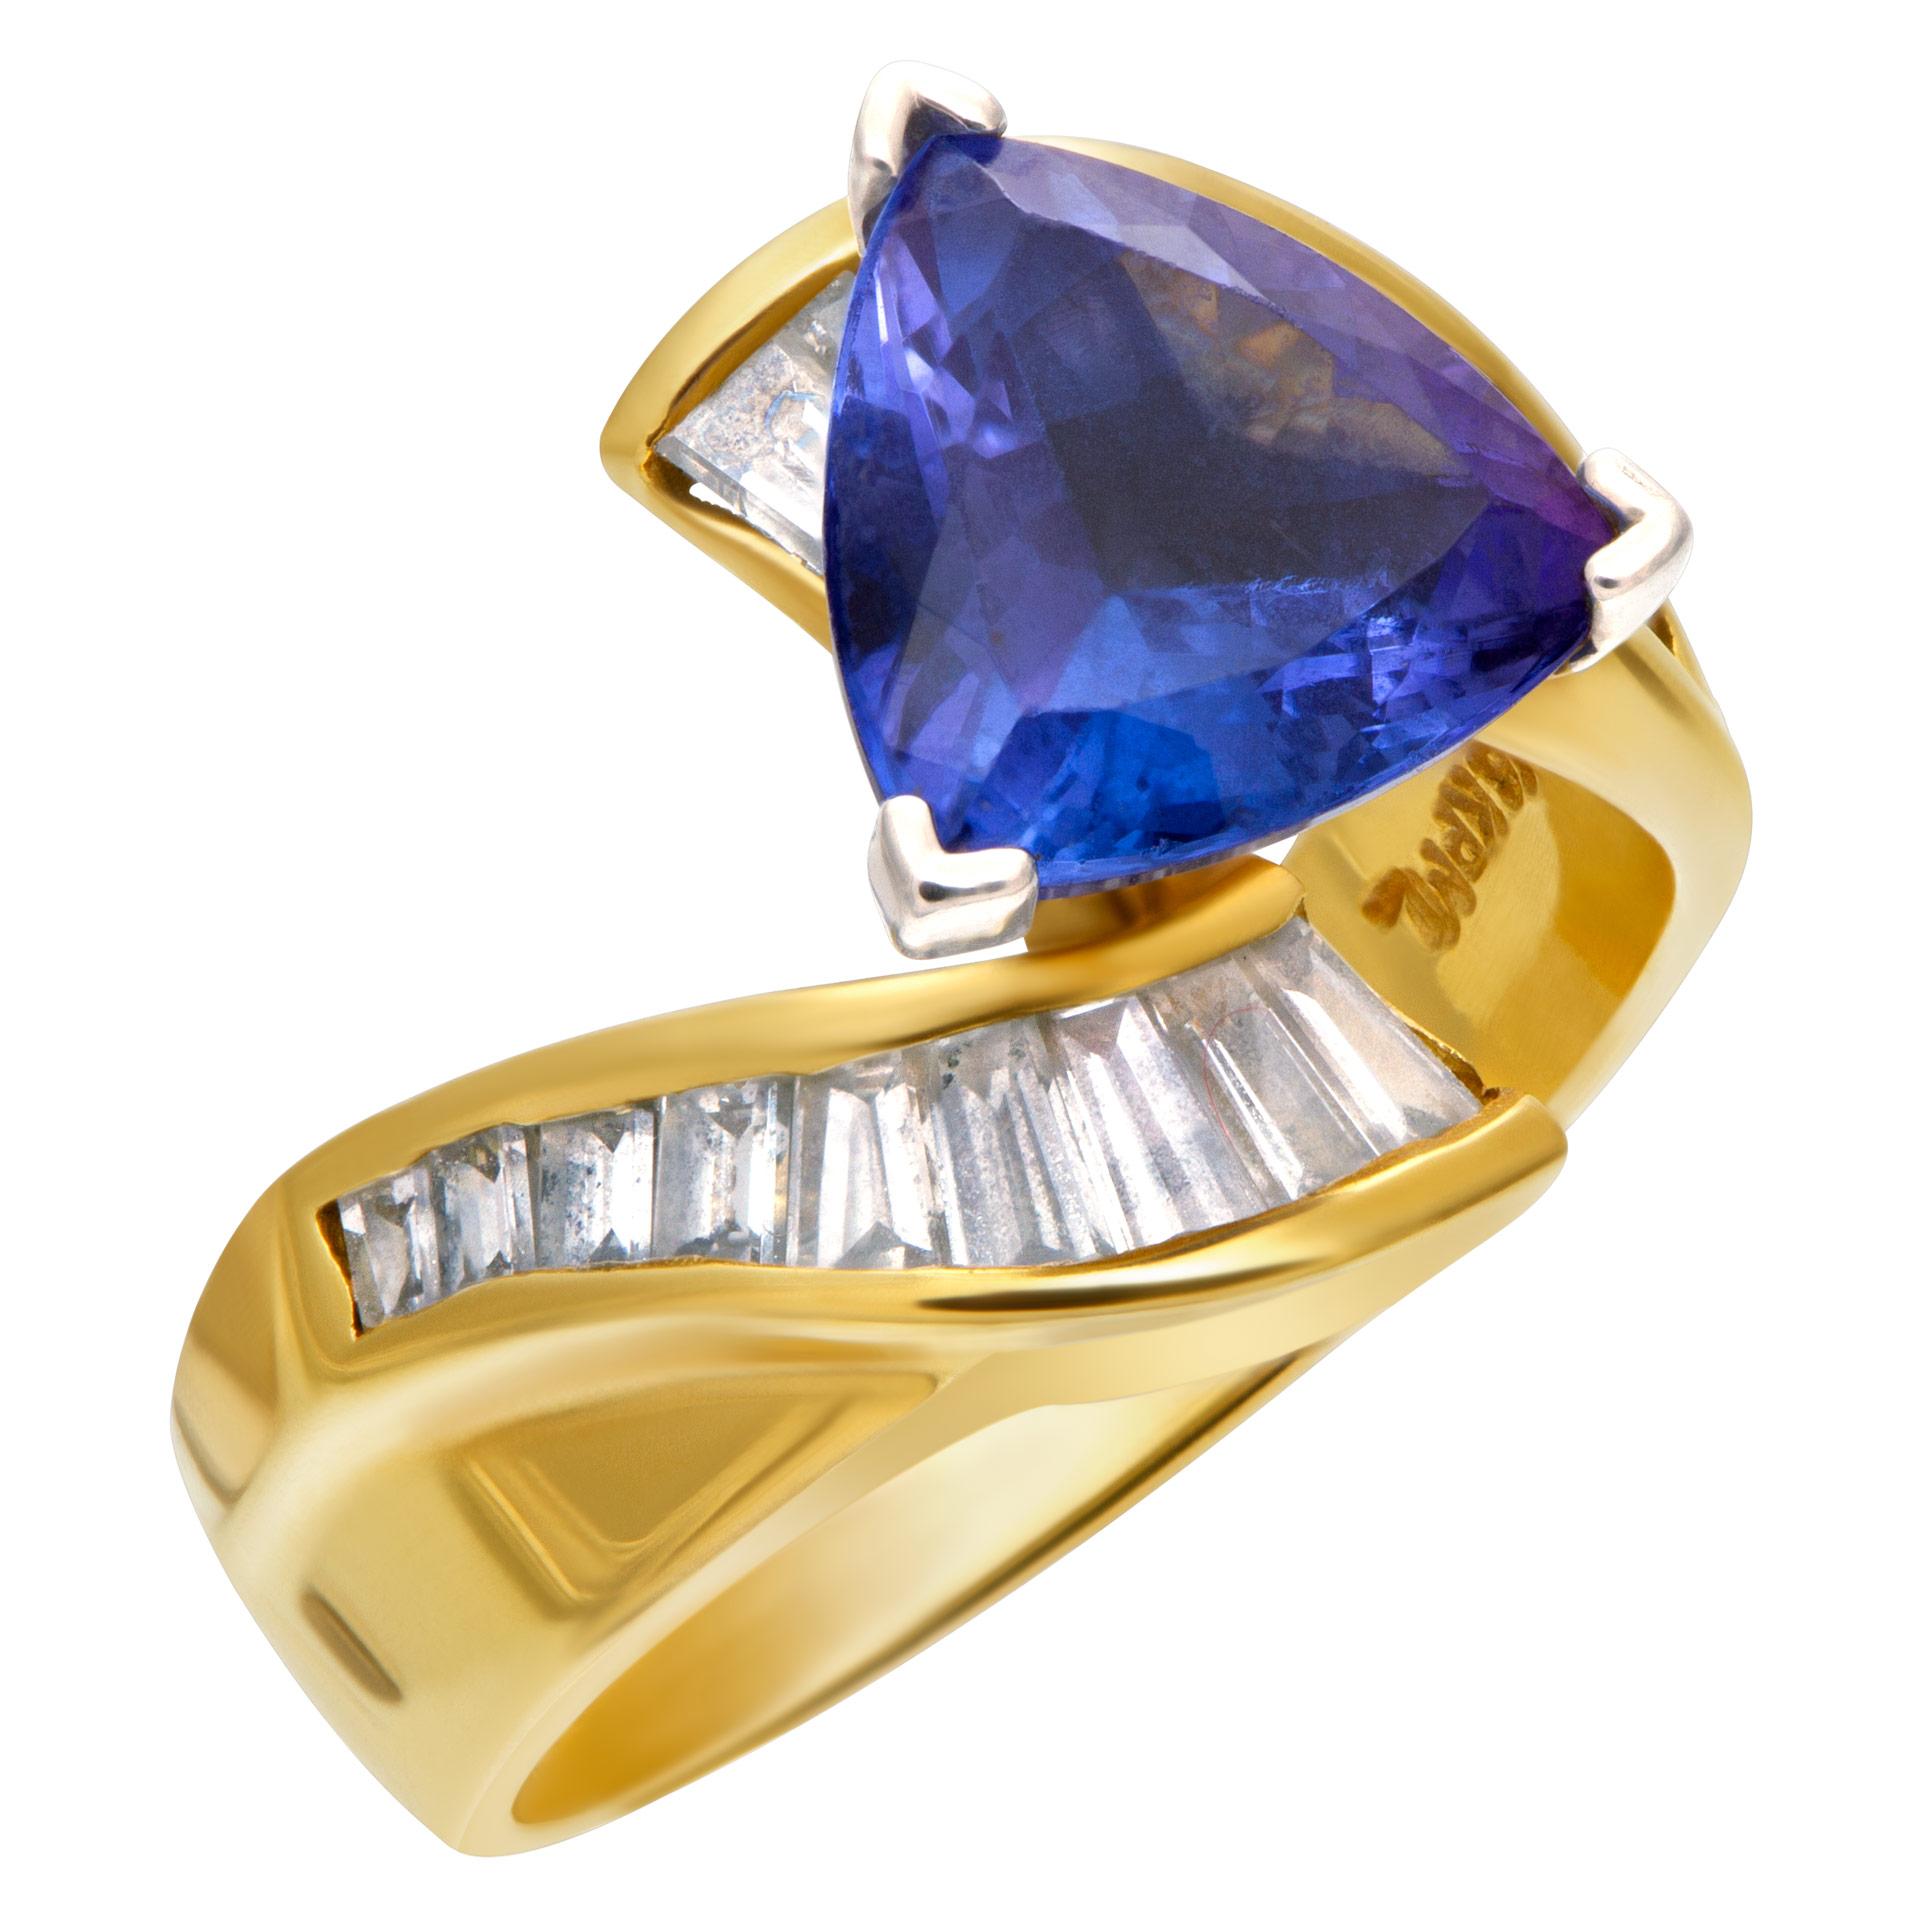 ESTIMATED RETAIL: $3,000 YOUR PRICE: $1,860 - African Tanzanite and diamond ring in 18k yellow gold with approximately 1 carat trillion cut tanzanite and approximately 0.50 carats in baguette diamonds. Width at head: 9.6mm, width at shank: 3.4mm.